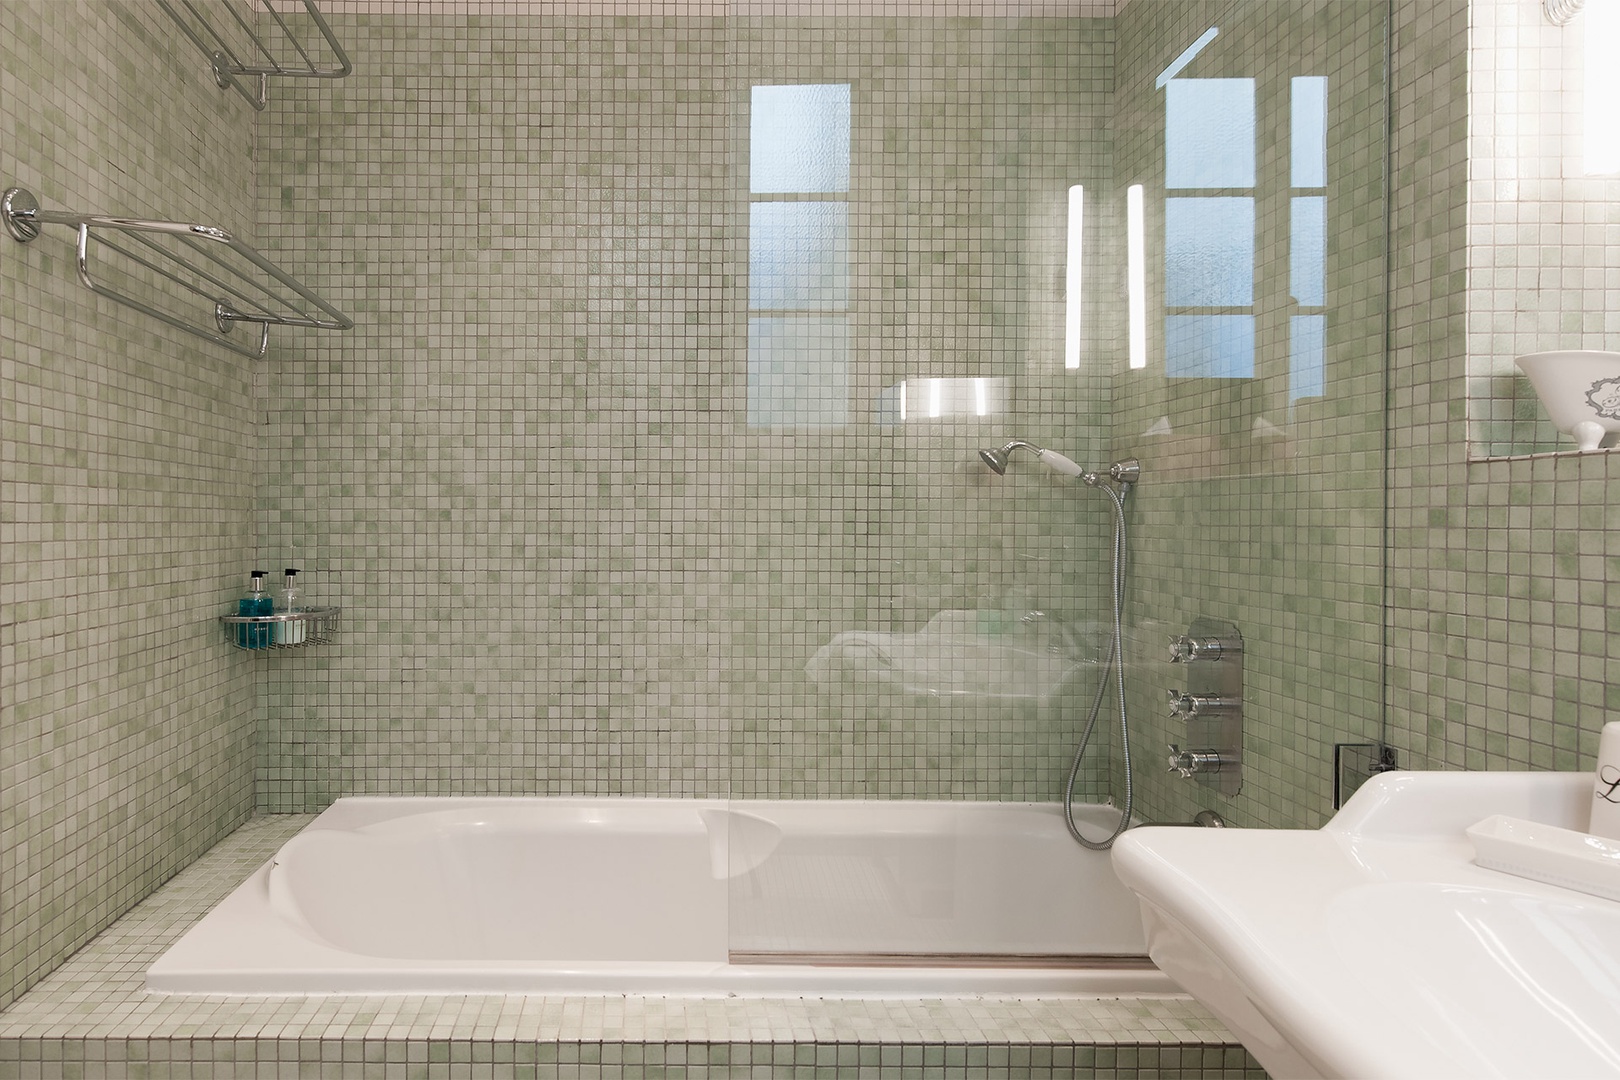 Take a relaxing bath surrounded by glistening tiles.